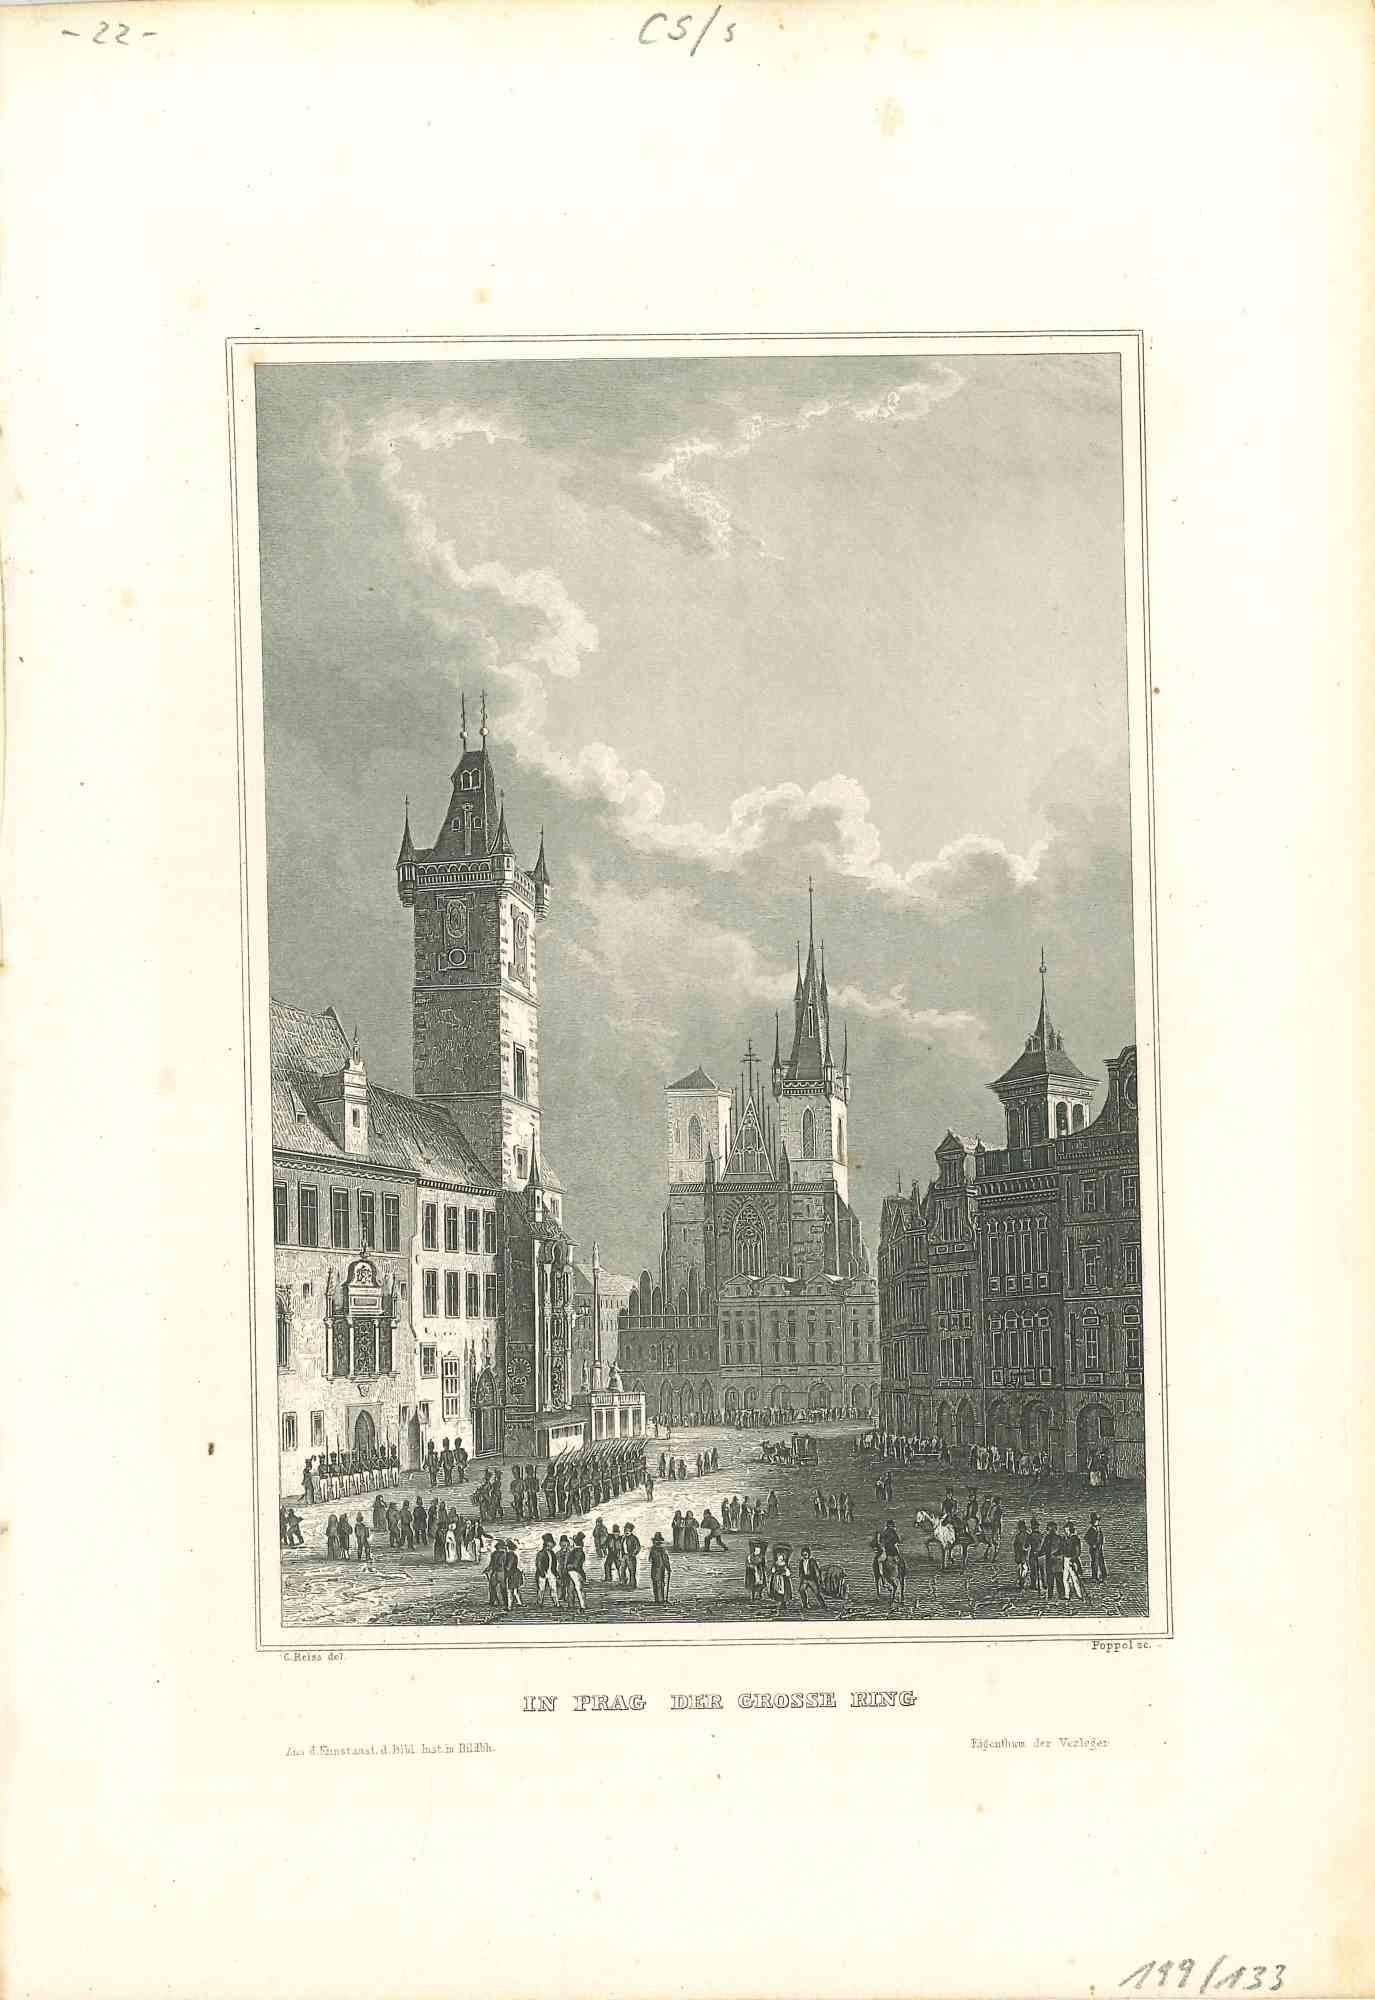 Unknown Figurative Print - In Prag der Grosse Ring - Original Lithograph - Half of the 19th Century